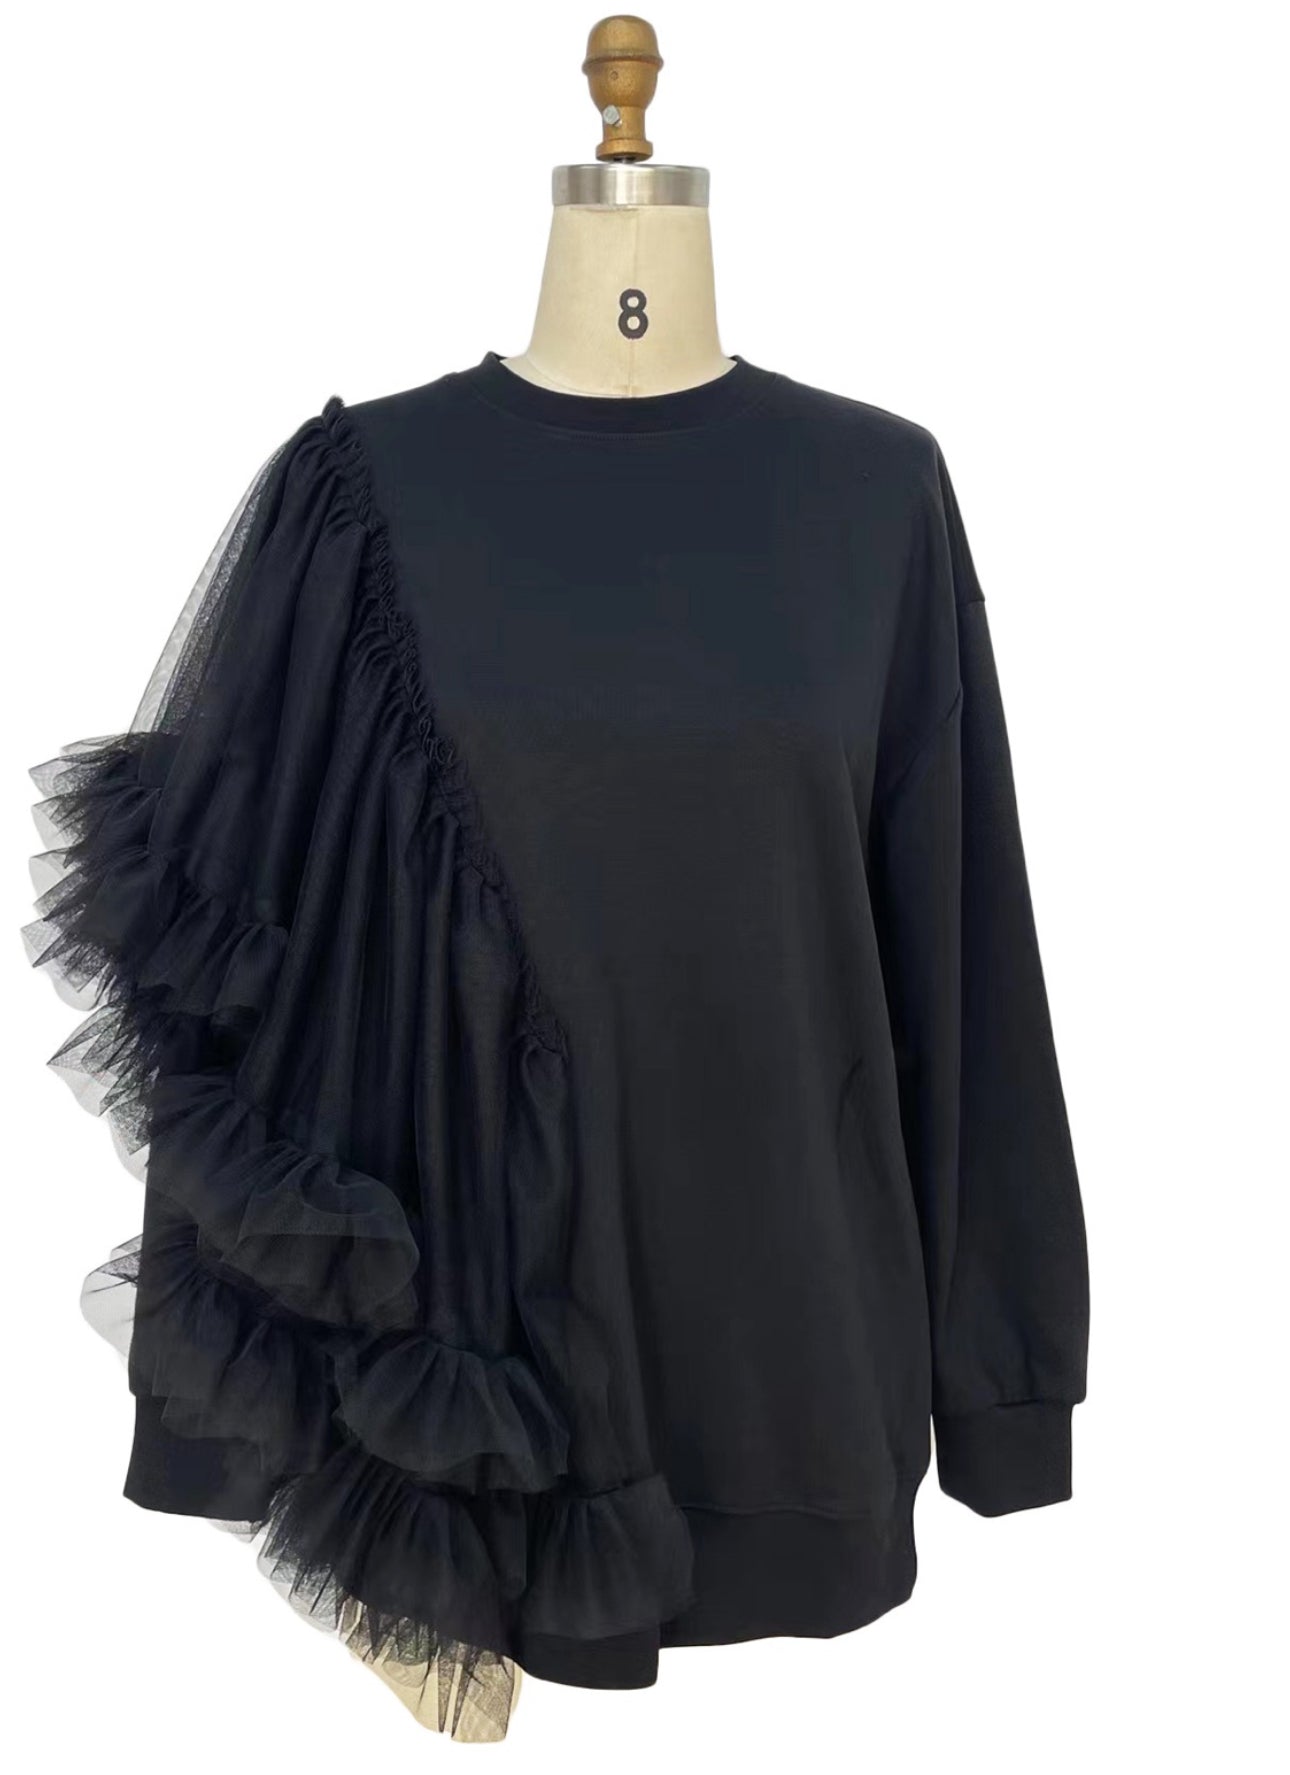 Cover Girl Tulle Sweatshirt (also available in Brown)